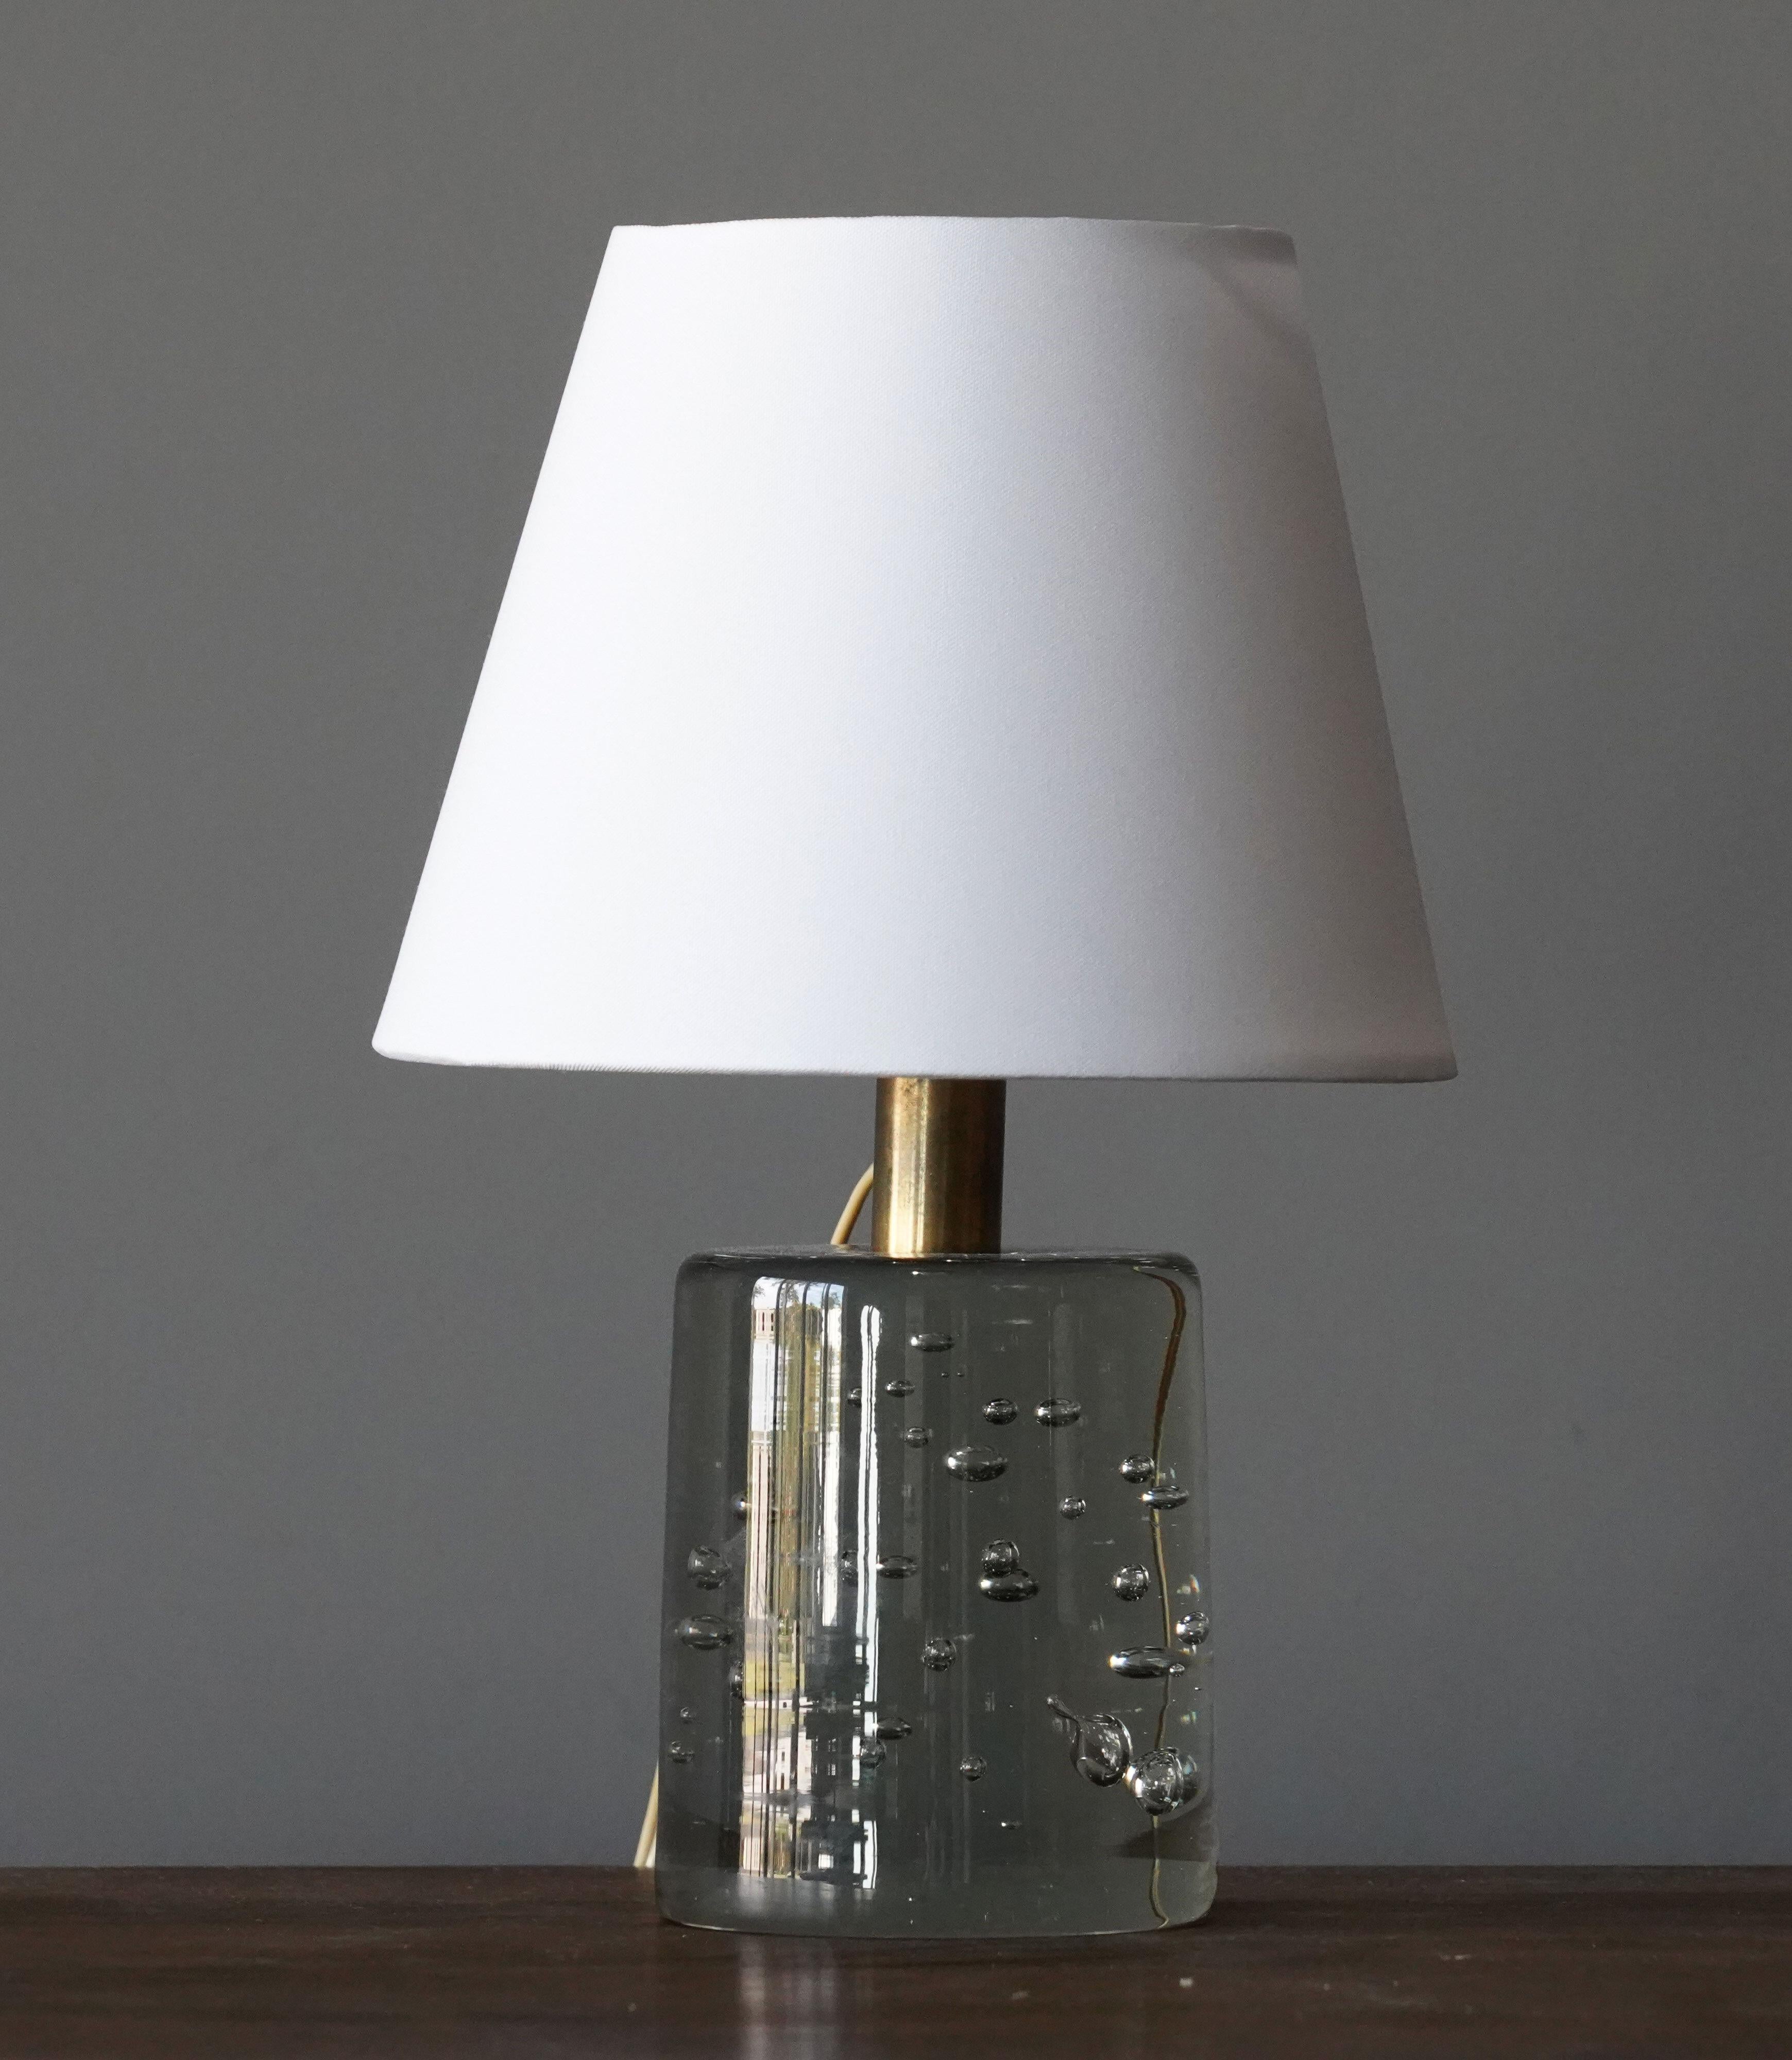 An early table lamp by Josef Frank, in brass and studio glass from Reijmyre Glasbruk. Produced by Svenskt Tenn, 1960s.

Sold without lampshade. Stated dimensions excluding lampshade.

Other lighting designers of the period include Hans-Agne